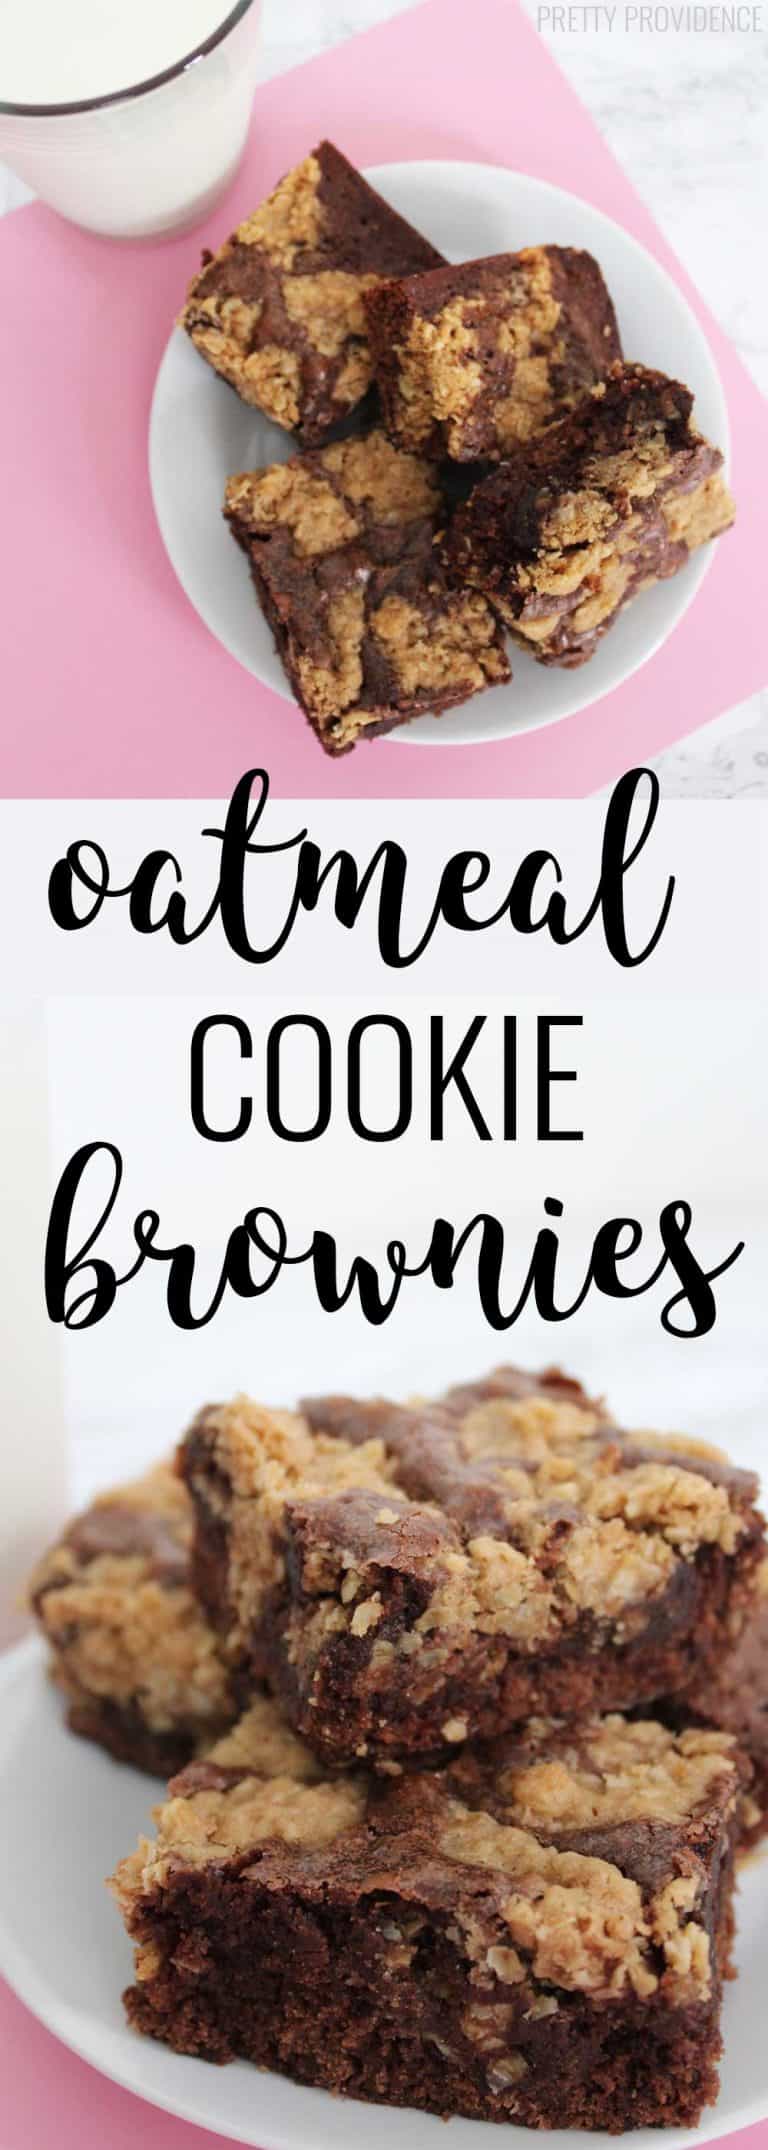 Oatmeal Cookie Brownies - Pretty Providence